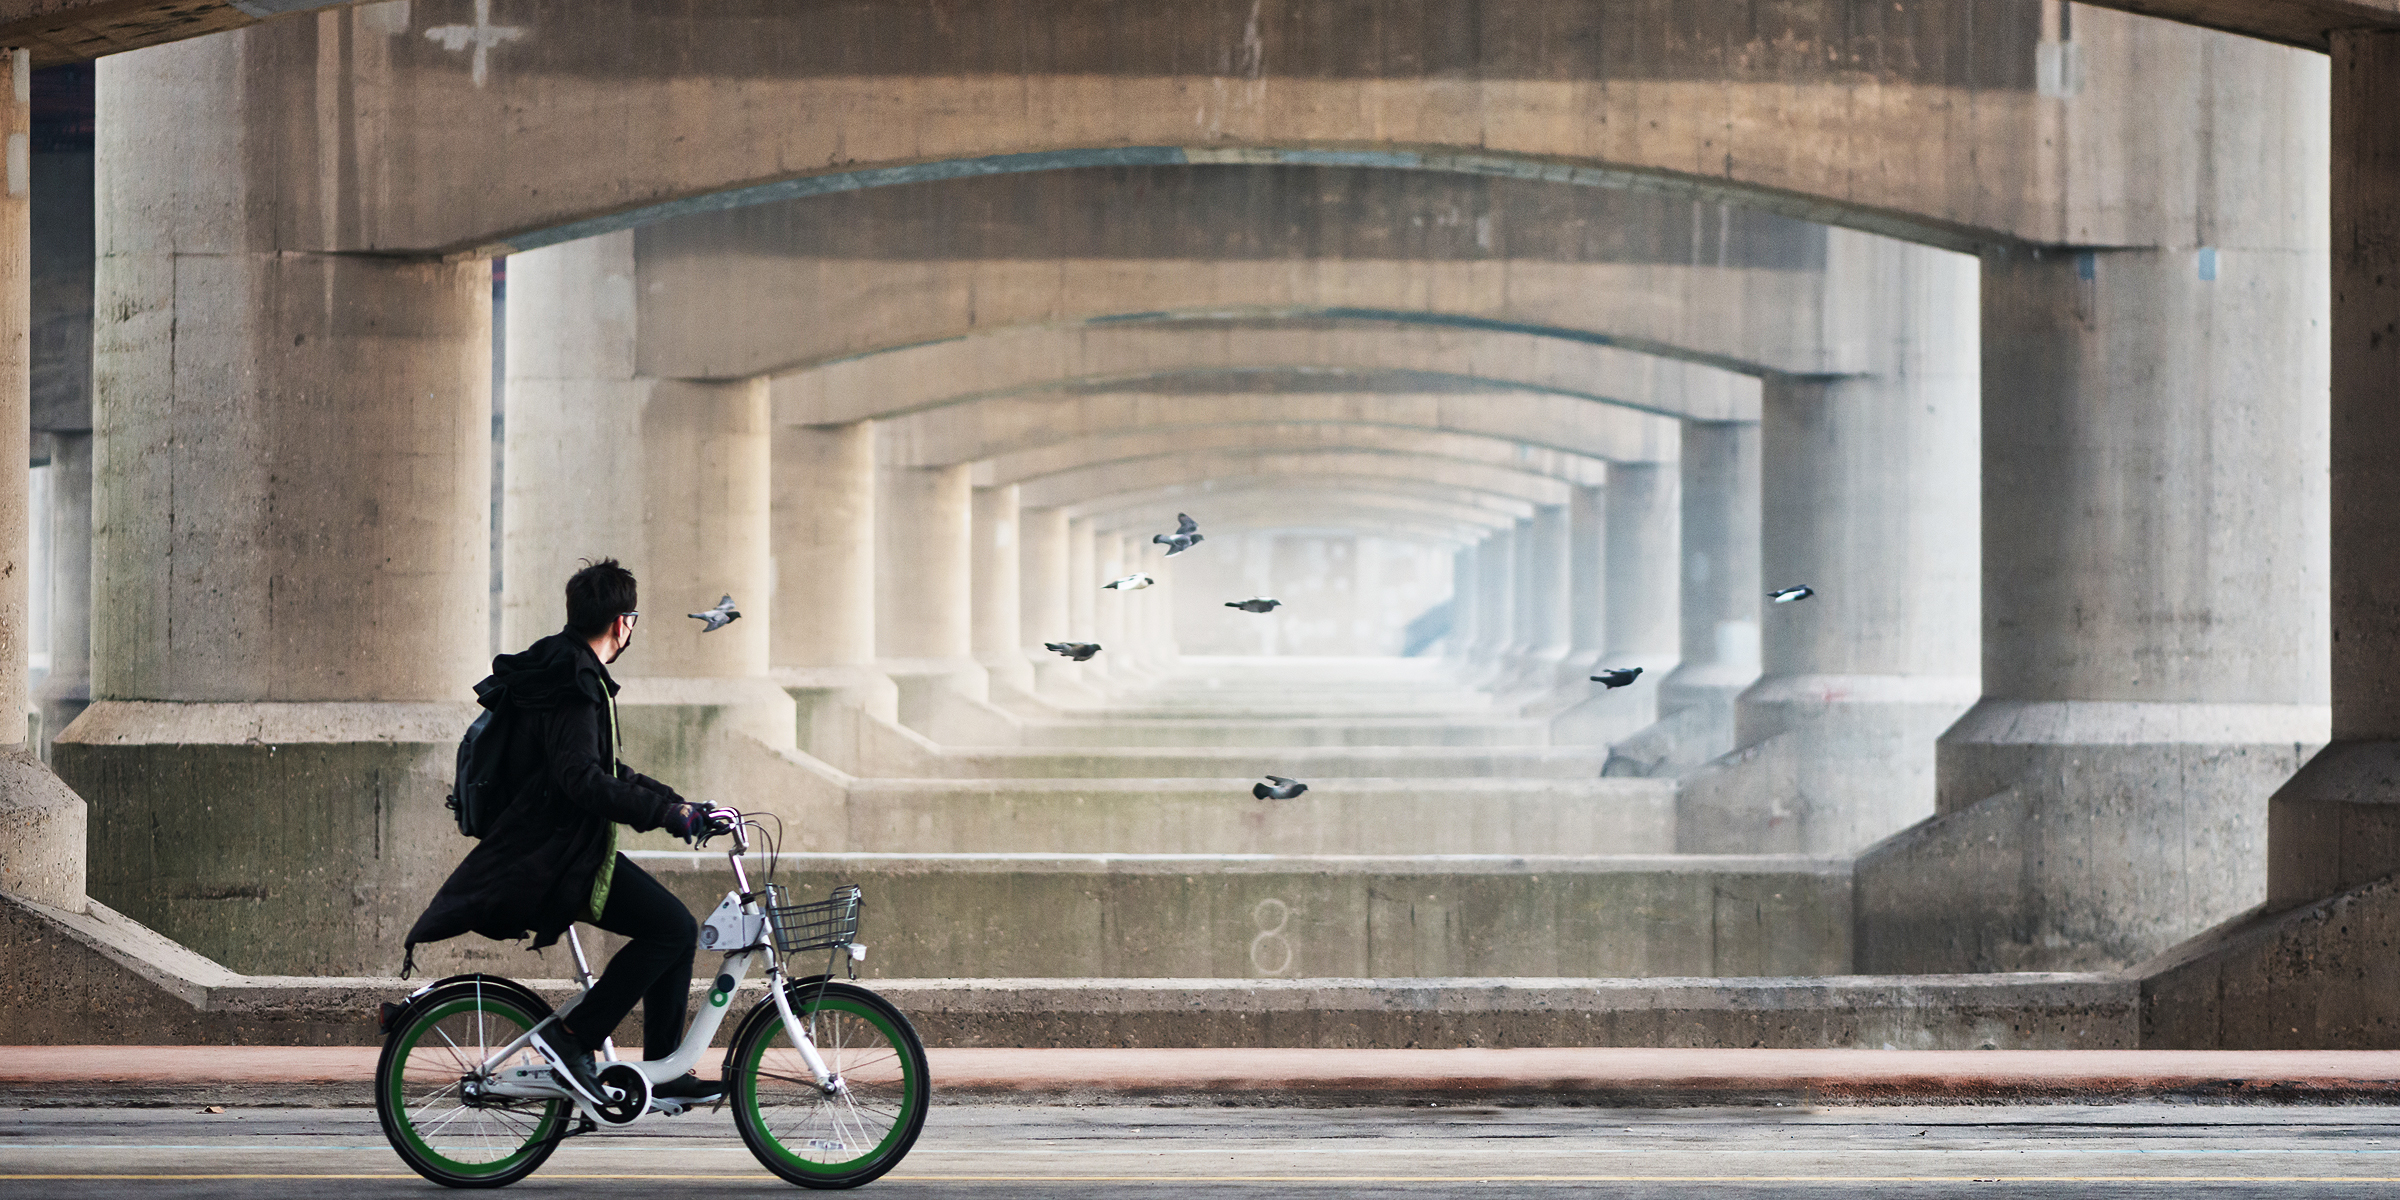 A person riding a bicycle | Source: Shutterstock